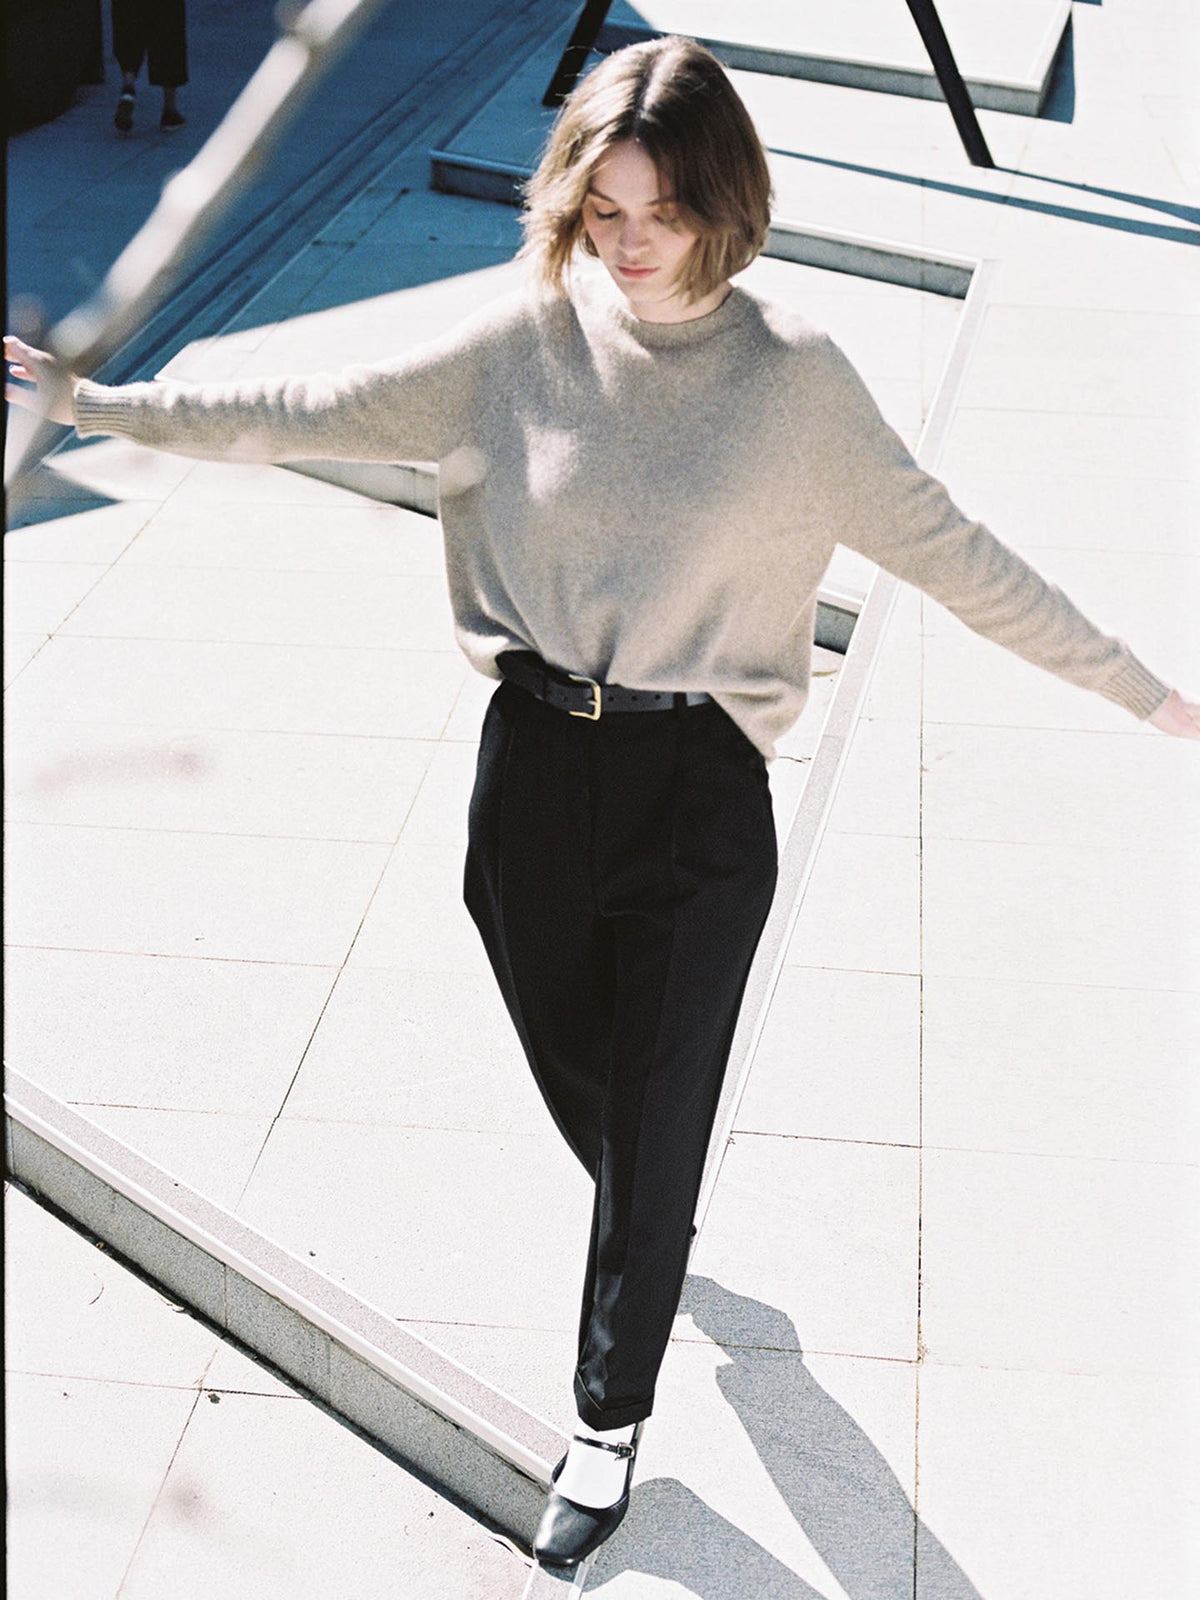 A woman in a Francie Nimbus Raglan Knit – Natural sweater and black trousers walks on a sunny outdoor walkway, arms outstretched for balance.